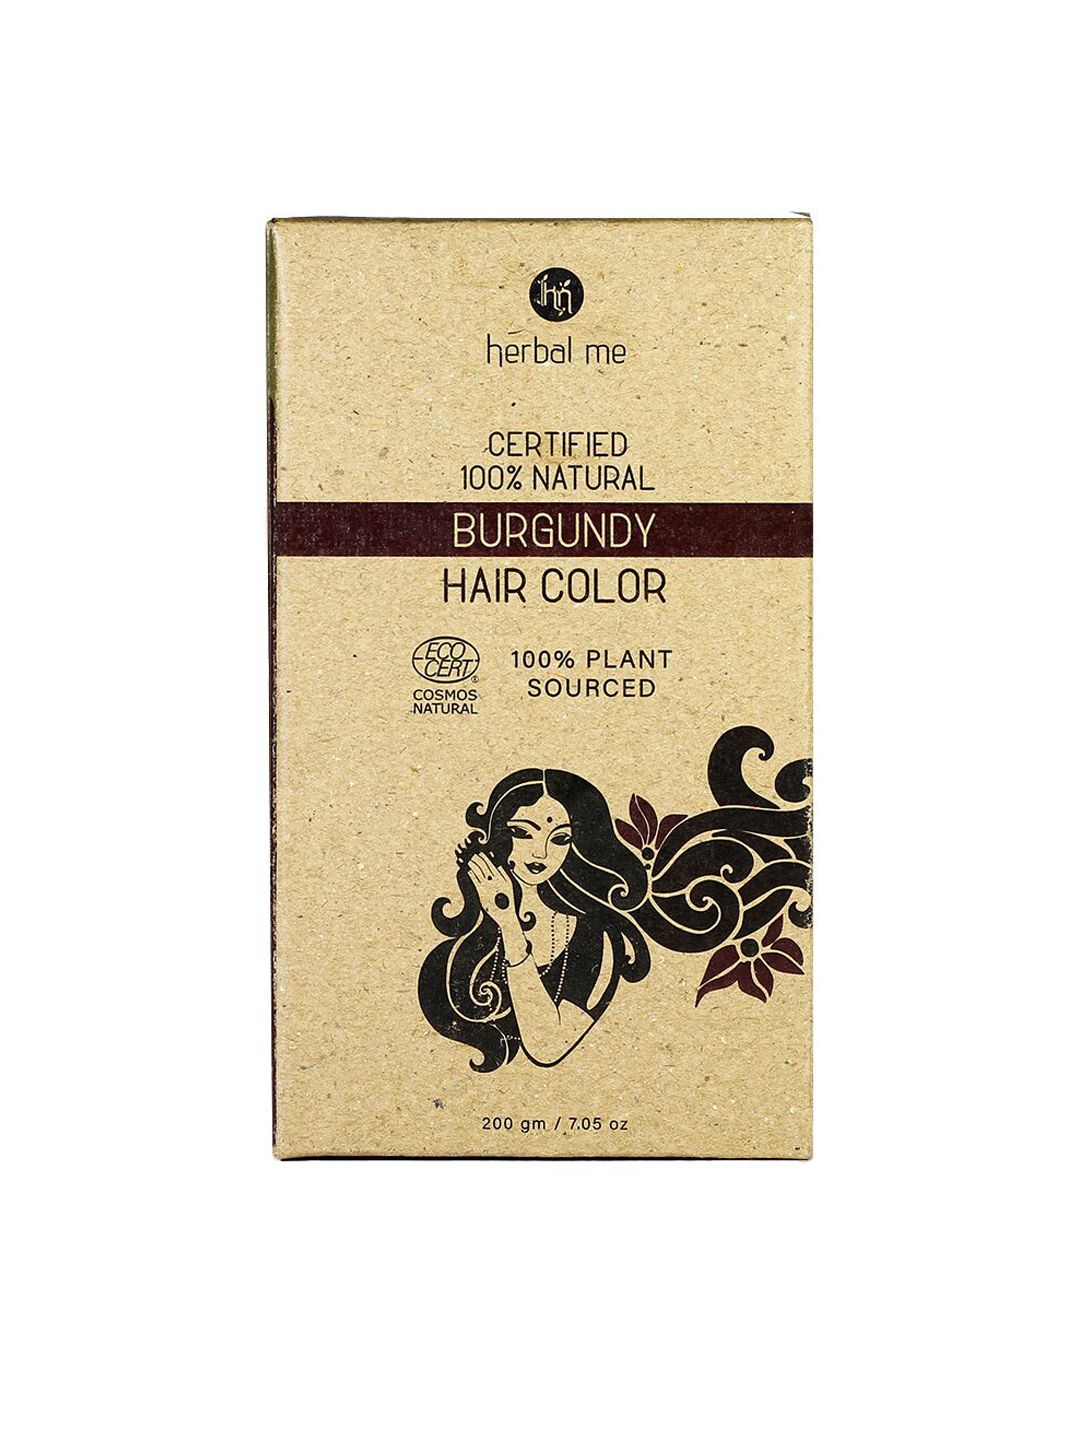 HERBAL ME Certified 100% Natural Hair Colour 200 g - Burgundy Price in India